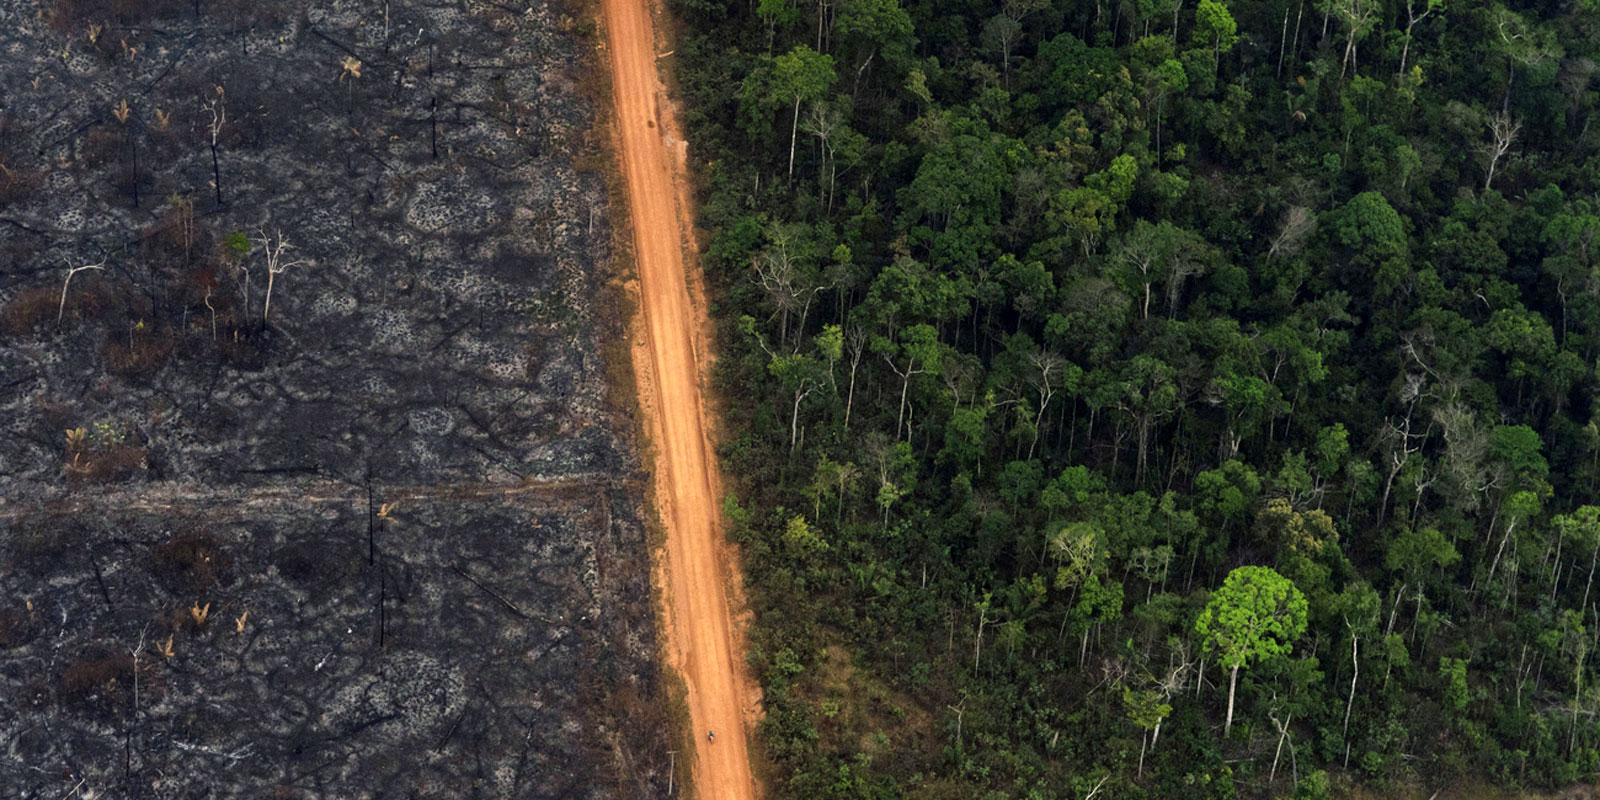 Enlarged view: Deforestation in the South American rainforest extends along roads - as here in the Brazilian Amazon region. (AP Photo/Victor R. Caivano) 